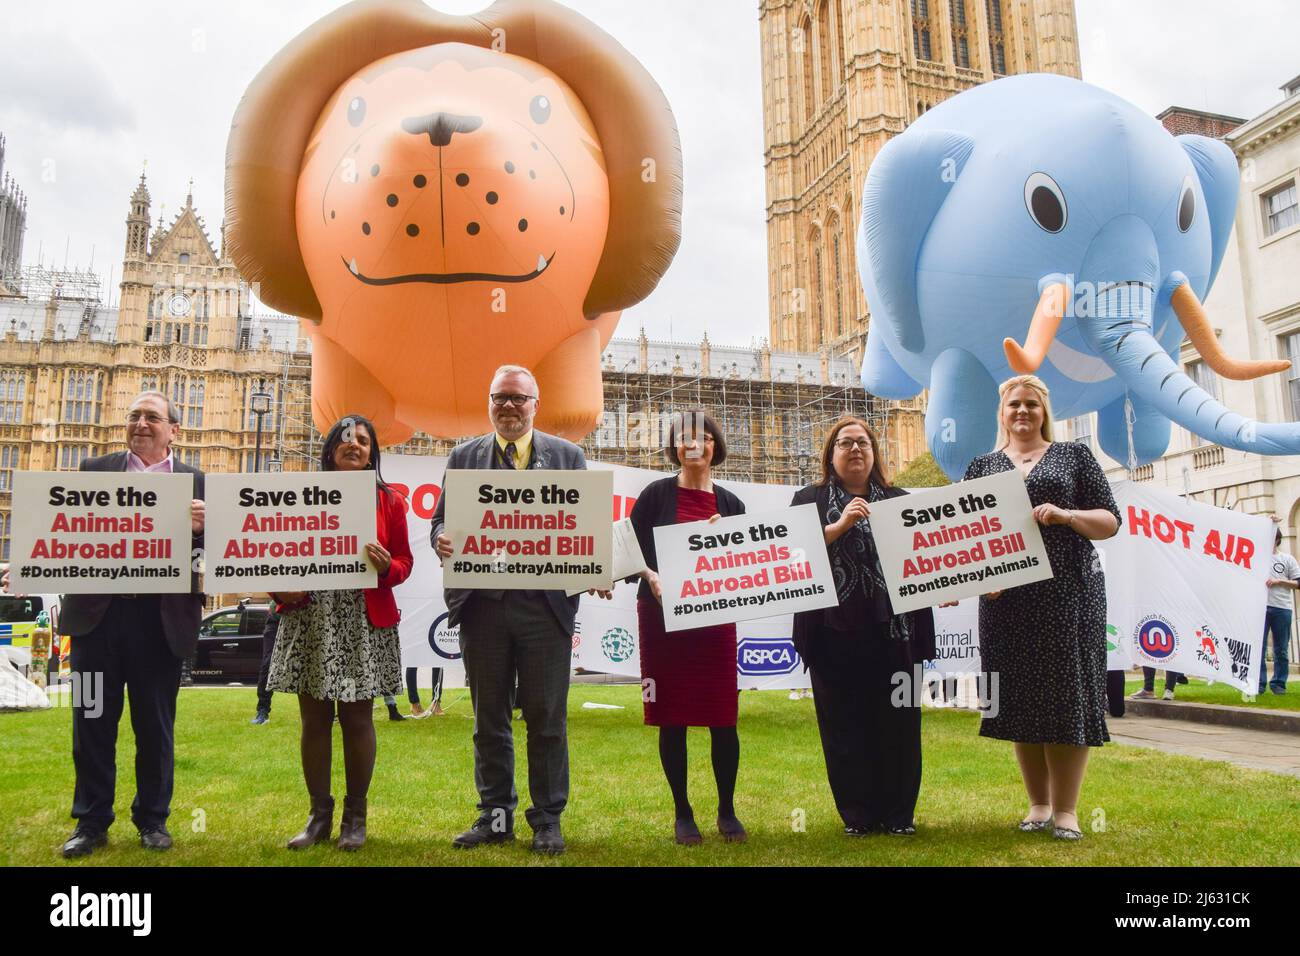 London, England, UK. 27th Apr, 2022. L-R: SNP MP JOHN MCNALLY, Labour MP RUPA HUQ, SNP MP MARTYN DAY, SNP MP PATRICIA GIBSON, SNP MP KIRSTEN OSWALD, and Labour MP ALEX DAVIES-JONES. Various animal welfare organisations gathered outside Parliament and flew huge lion and elephant balloons in response to reports that the government will drop the Animals Abroad Bill. The organisations are calling on the government to go through with their promise to ban the import of hunting ''˜trophies', fur and foie gras to the UK, and the promotion of tourist elephant rides abroad. (Credit Image: Credit: ZUMA P Stock Photo